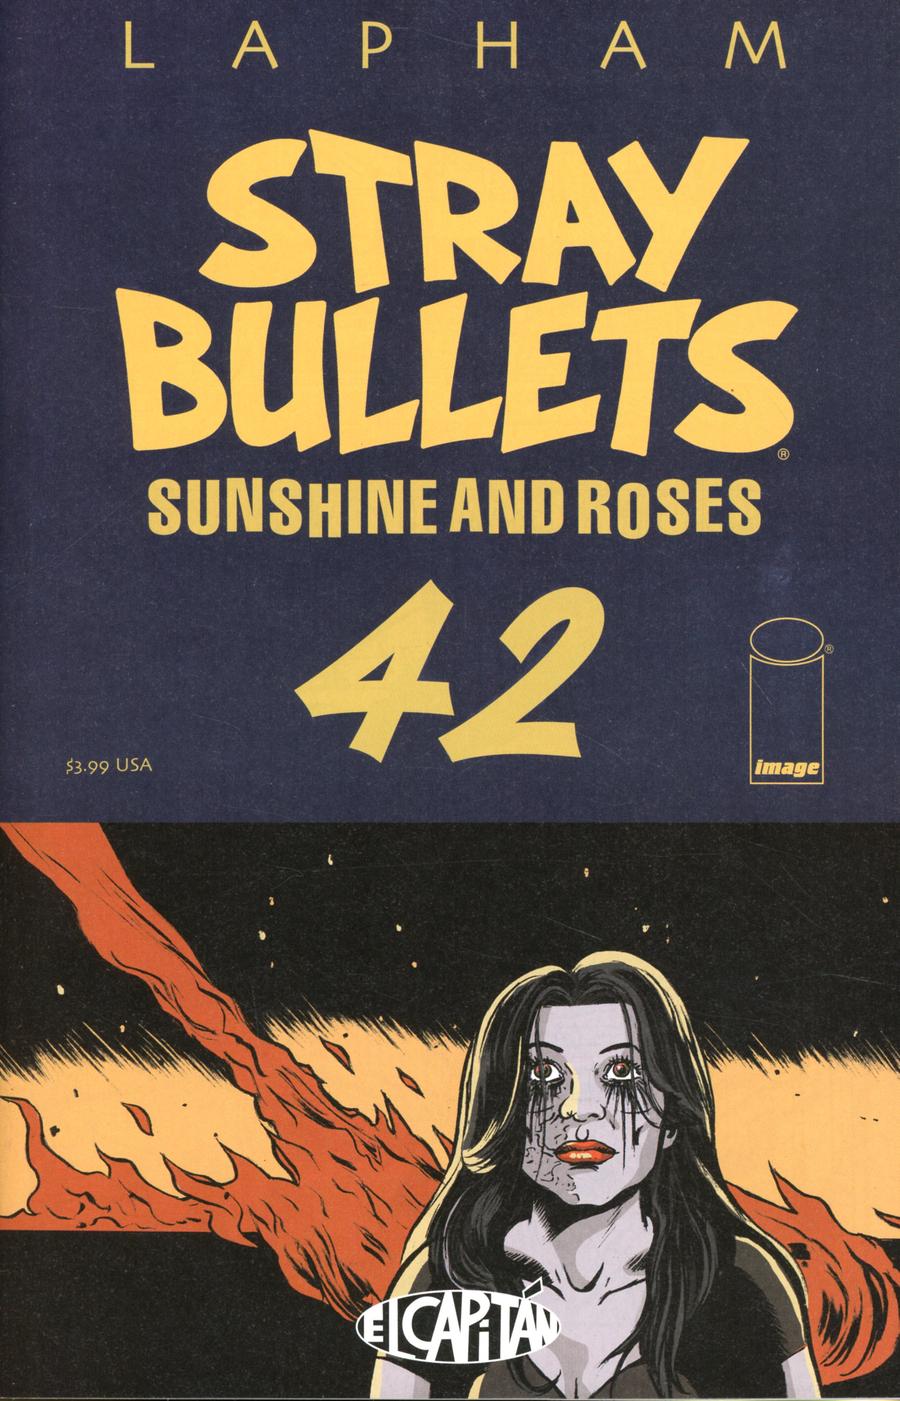 Stray Bullets Sunshine And Roses #42